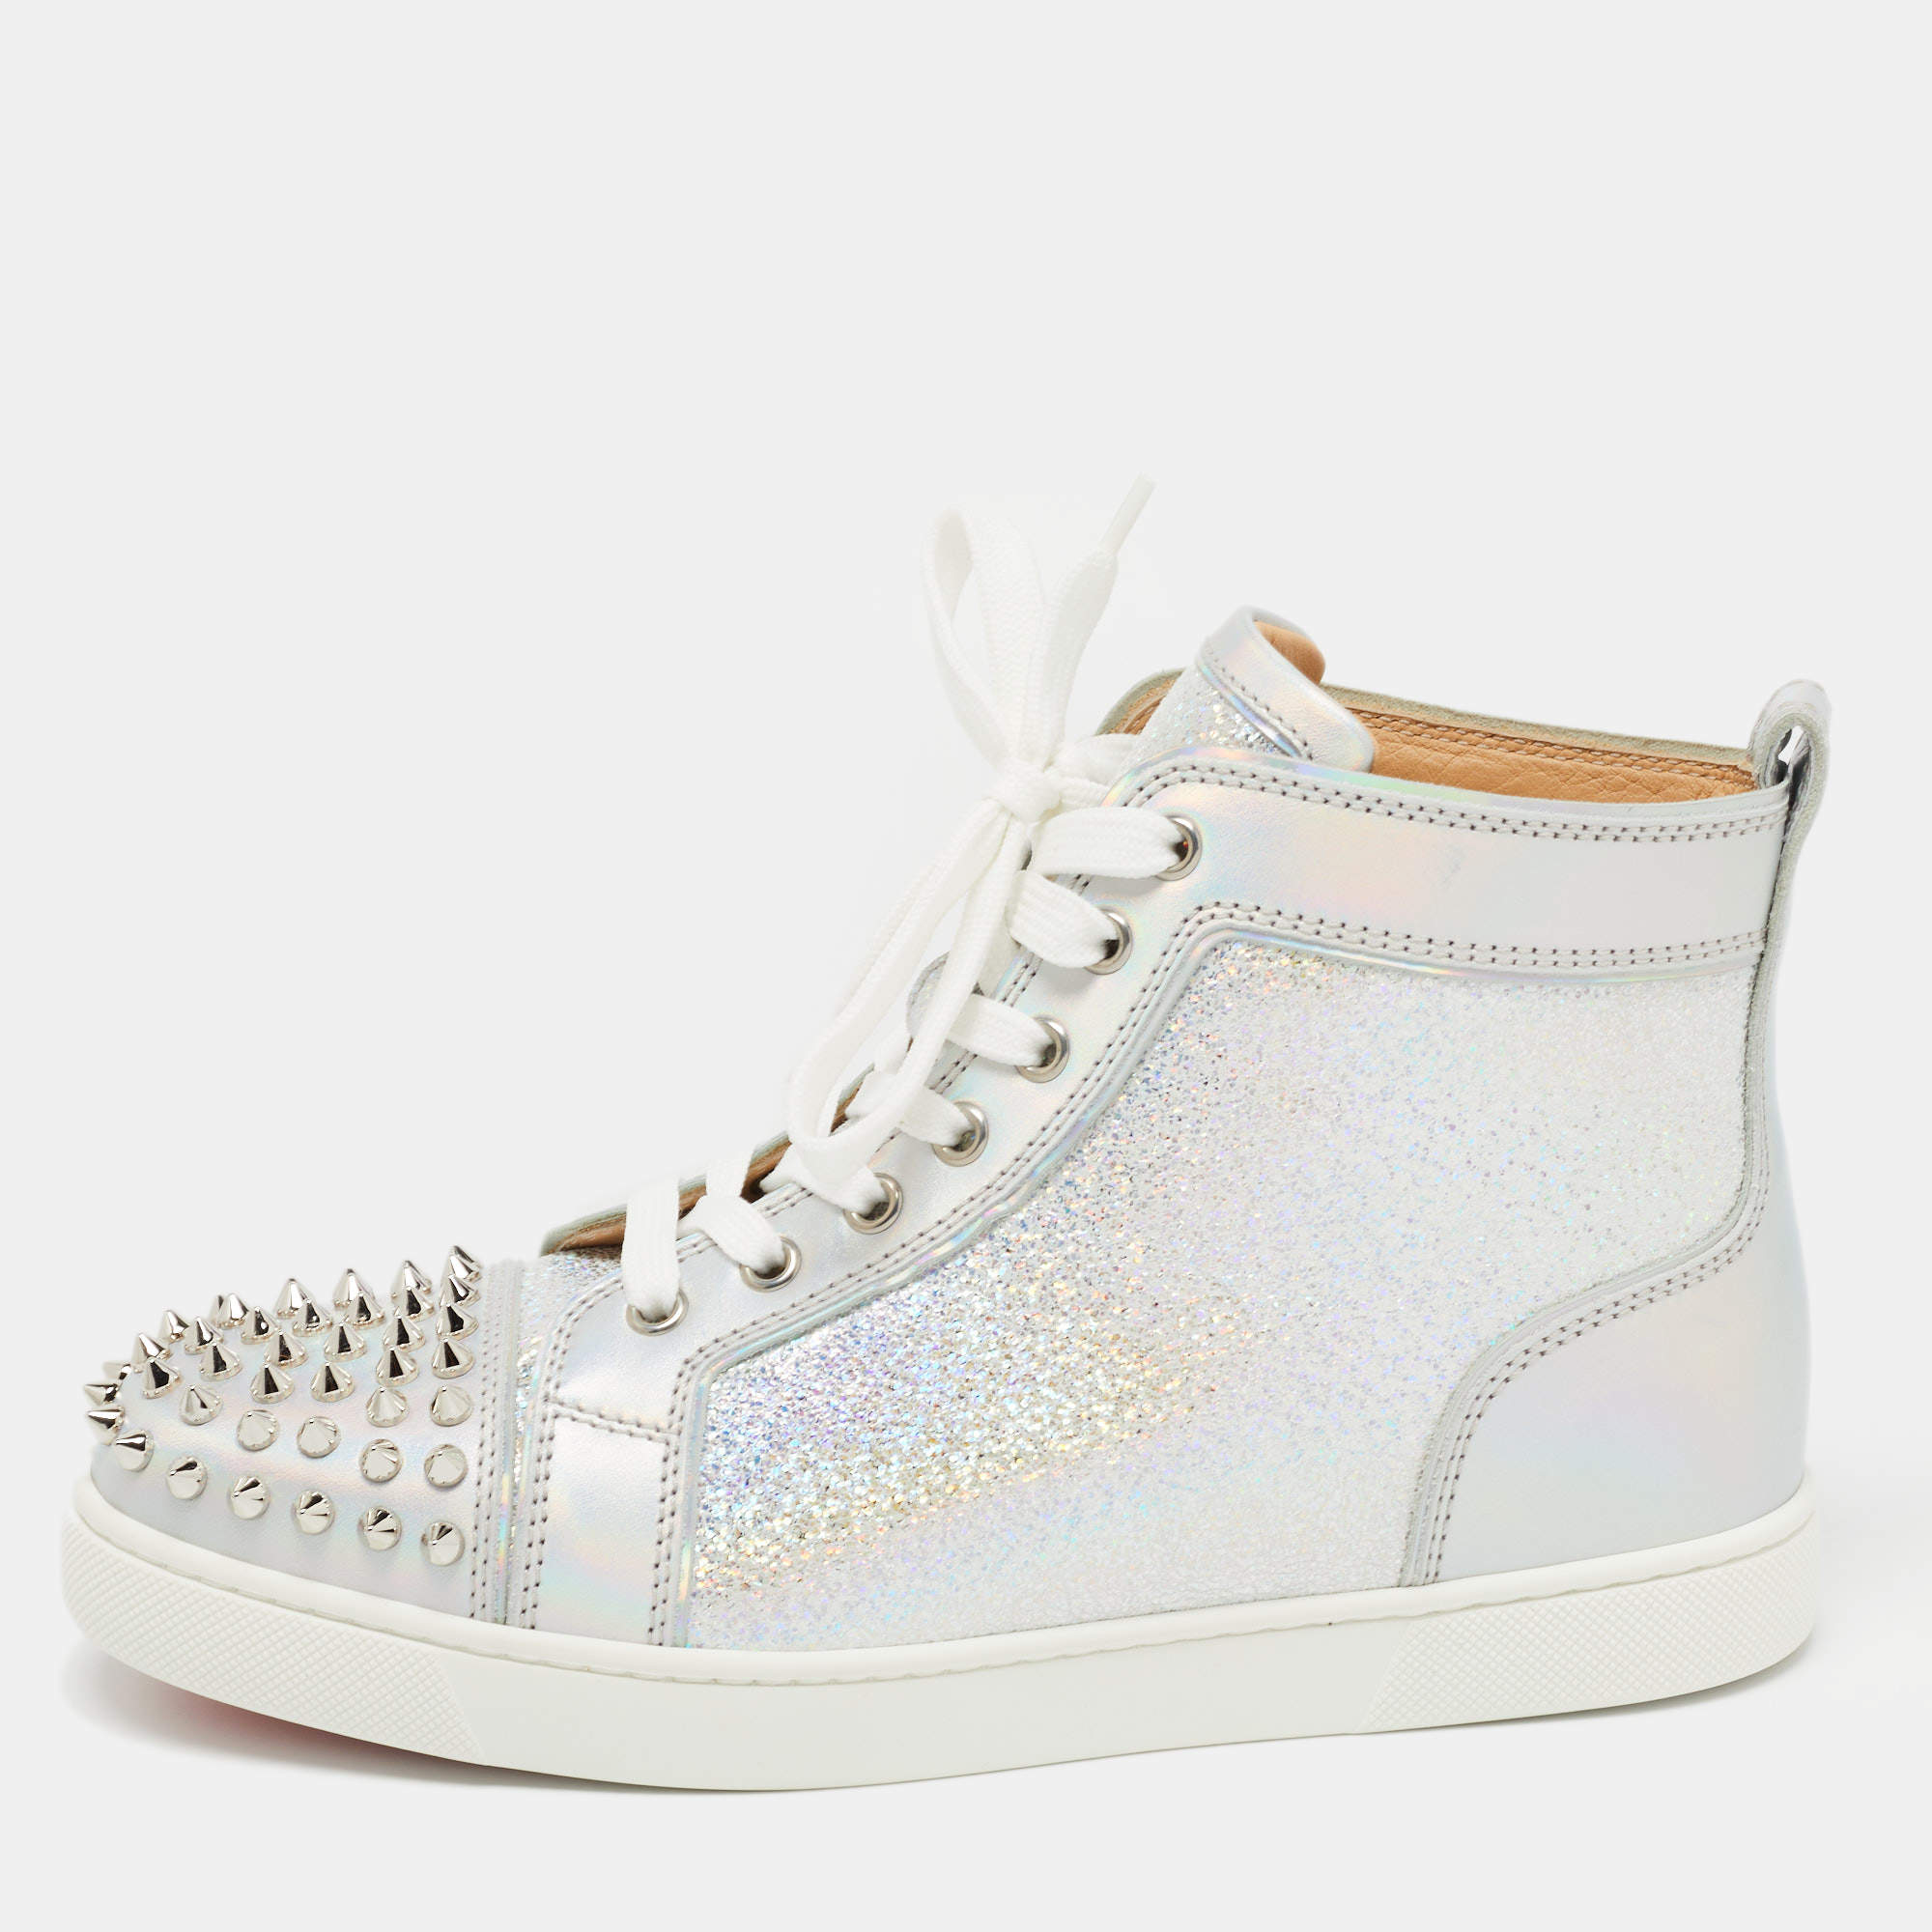 Syge person Hverdage hykleri Christian Louboutin Silver Laminated Suede and Leather Lou Spikes High Top  Sneakers Size 39 Christian Louboutin | TLC